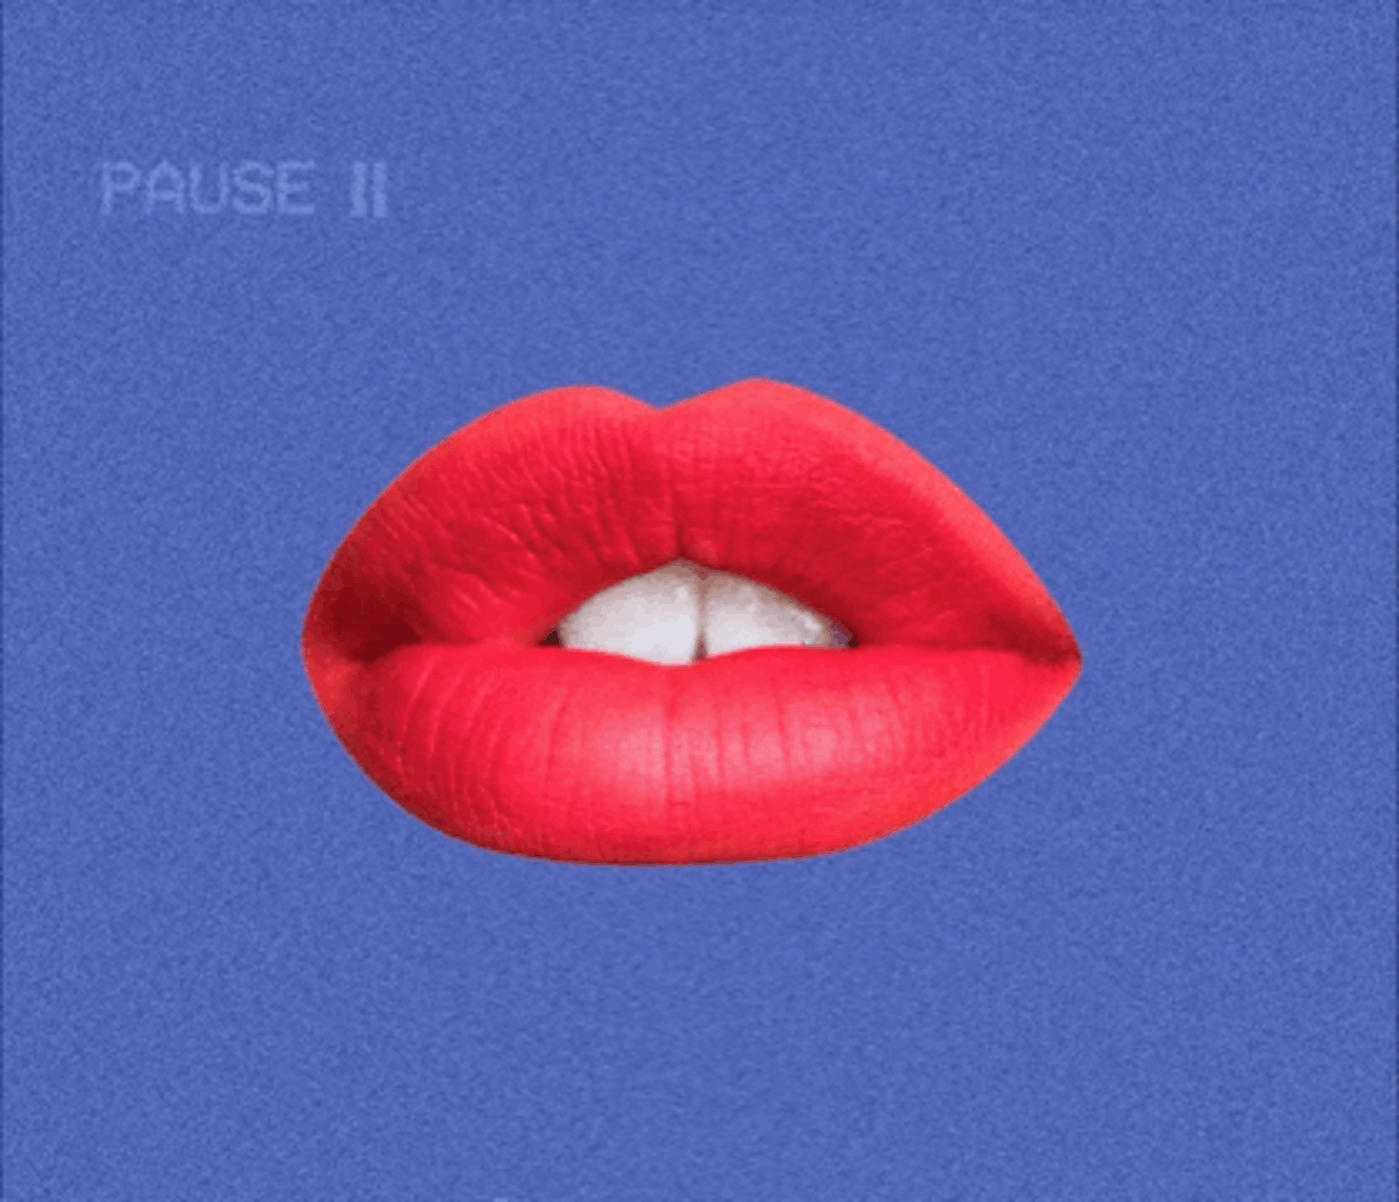 Animated image of bright red lips on a blue background, opening and closing with the word "PAUSE II" at the top.